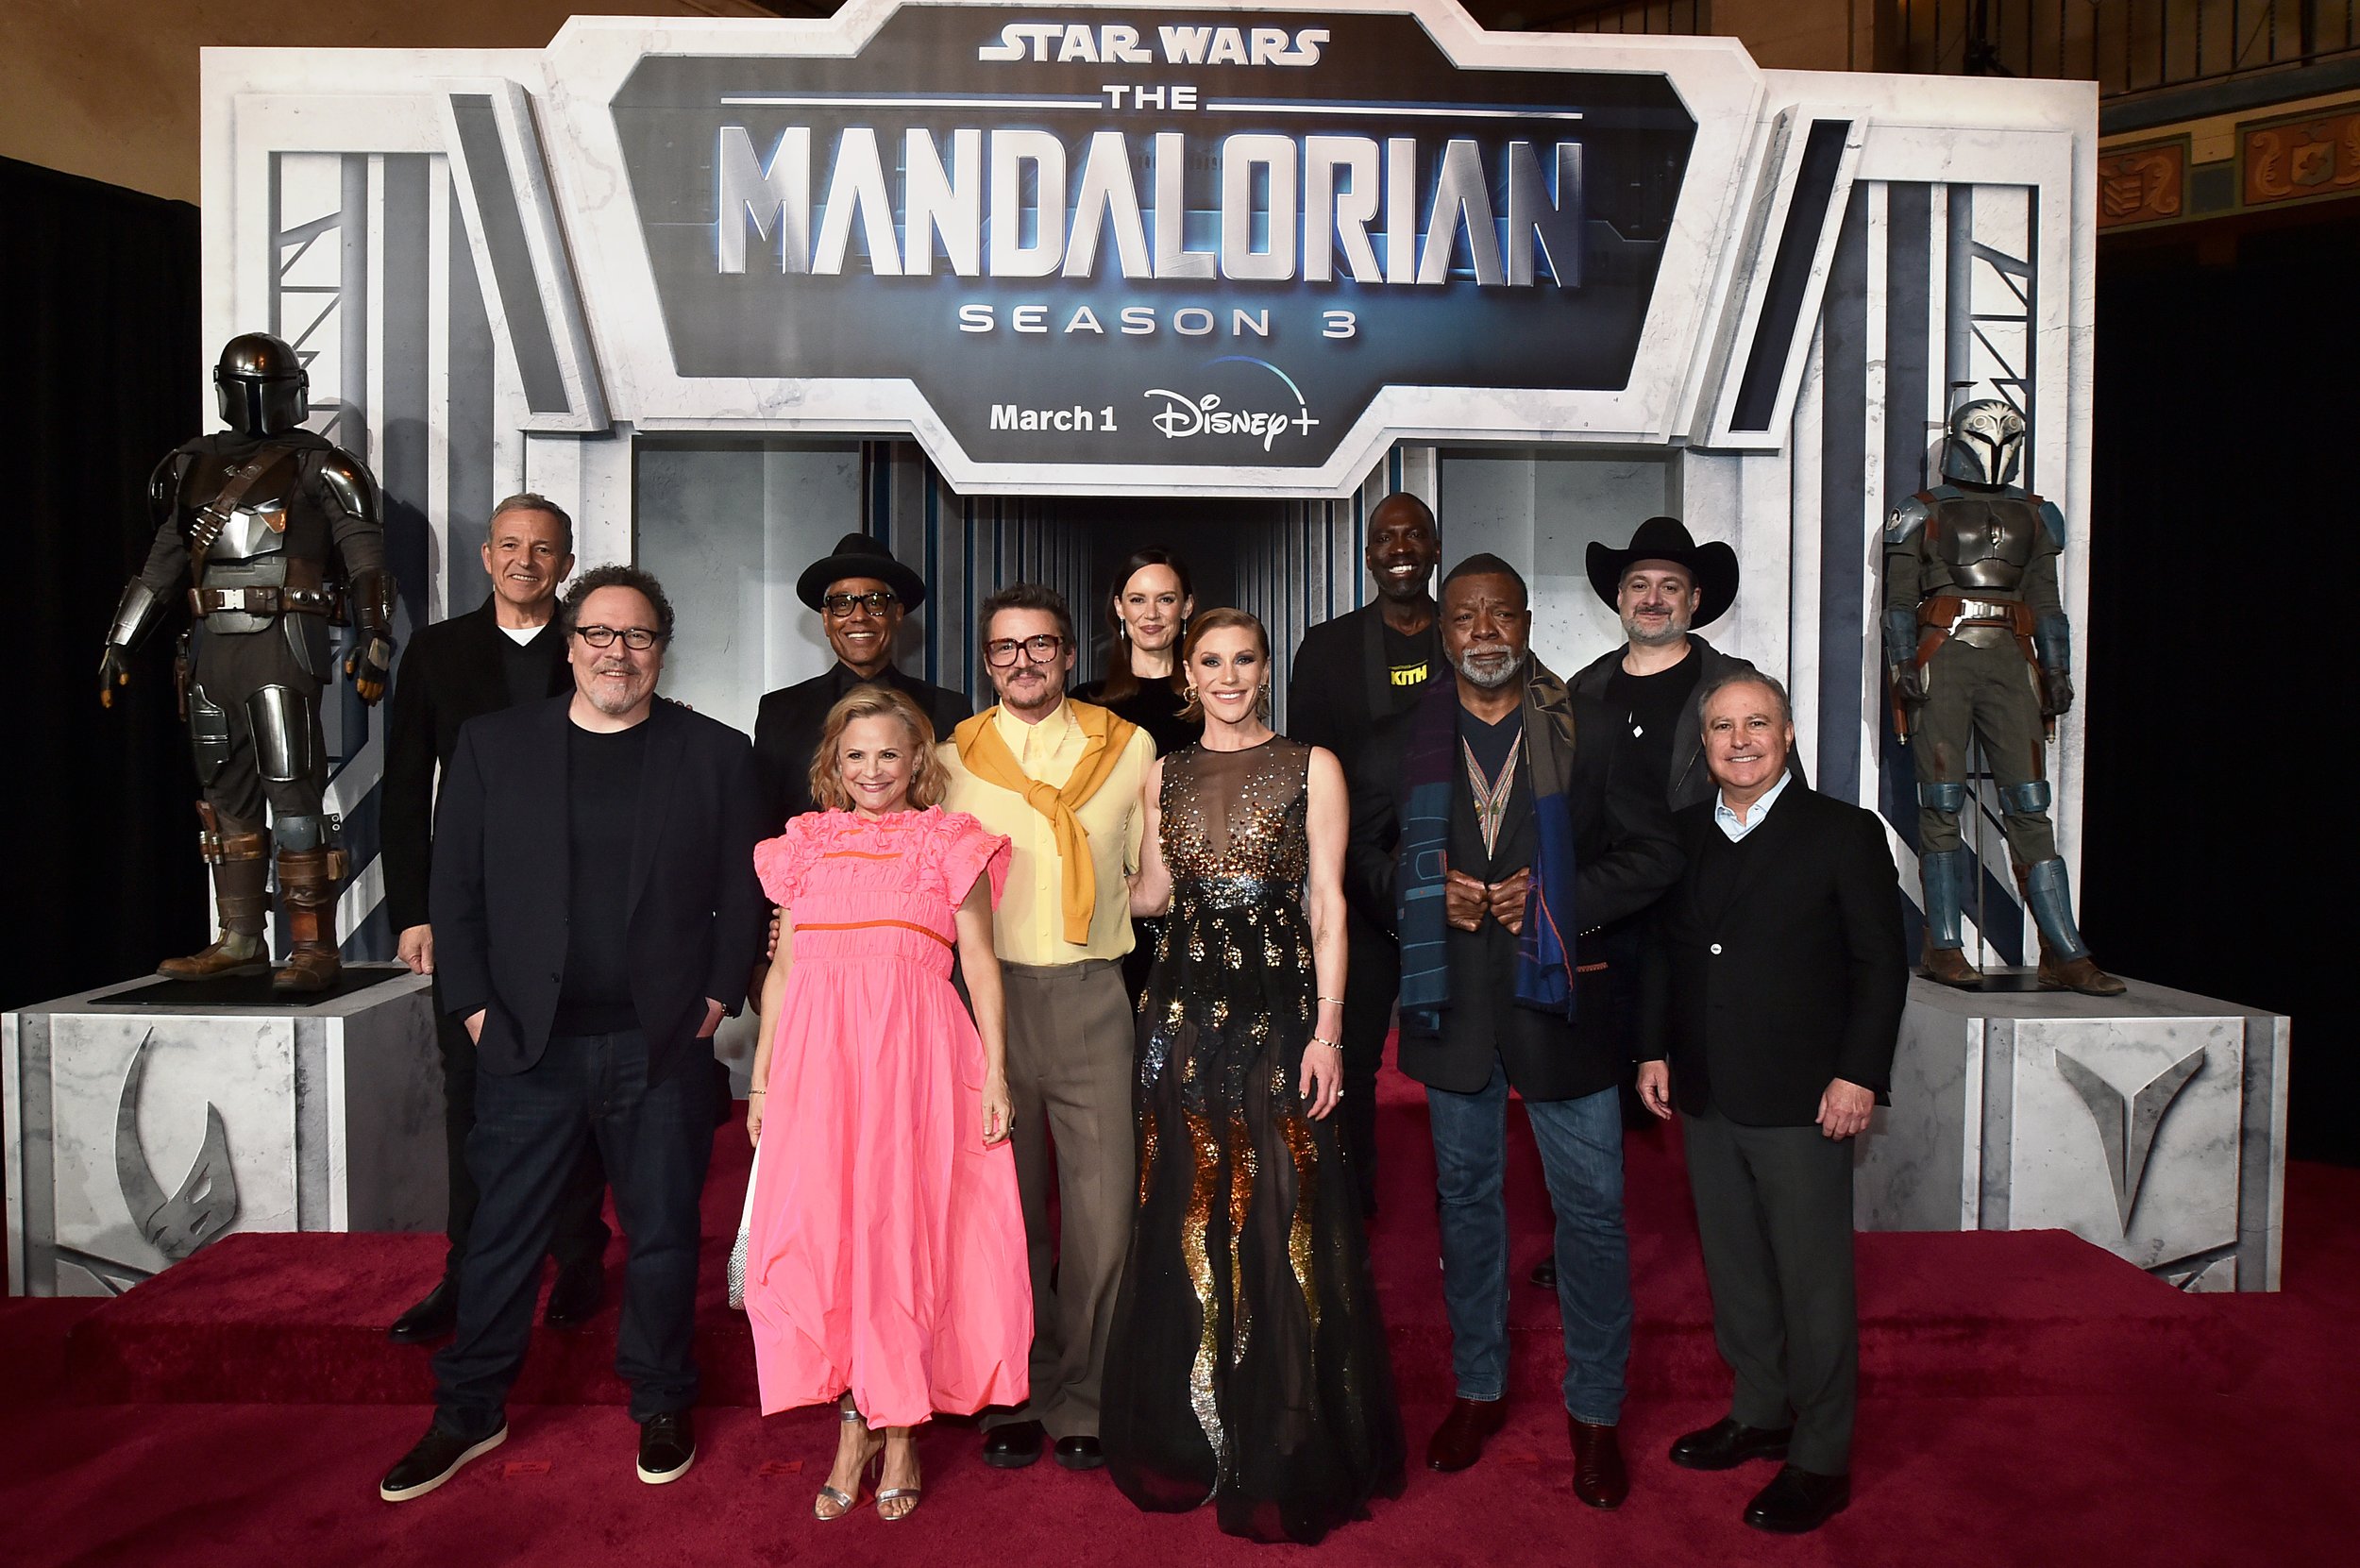 The Mandalorian Cast Have Suggestions and Songs for Season 3